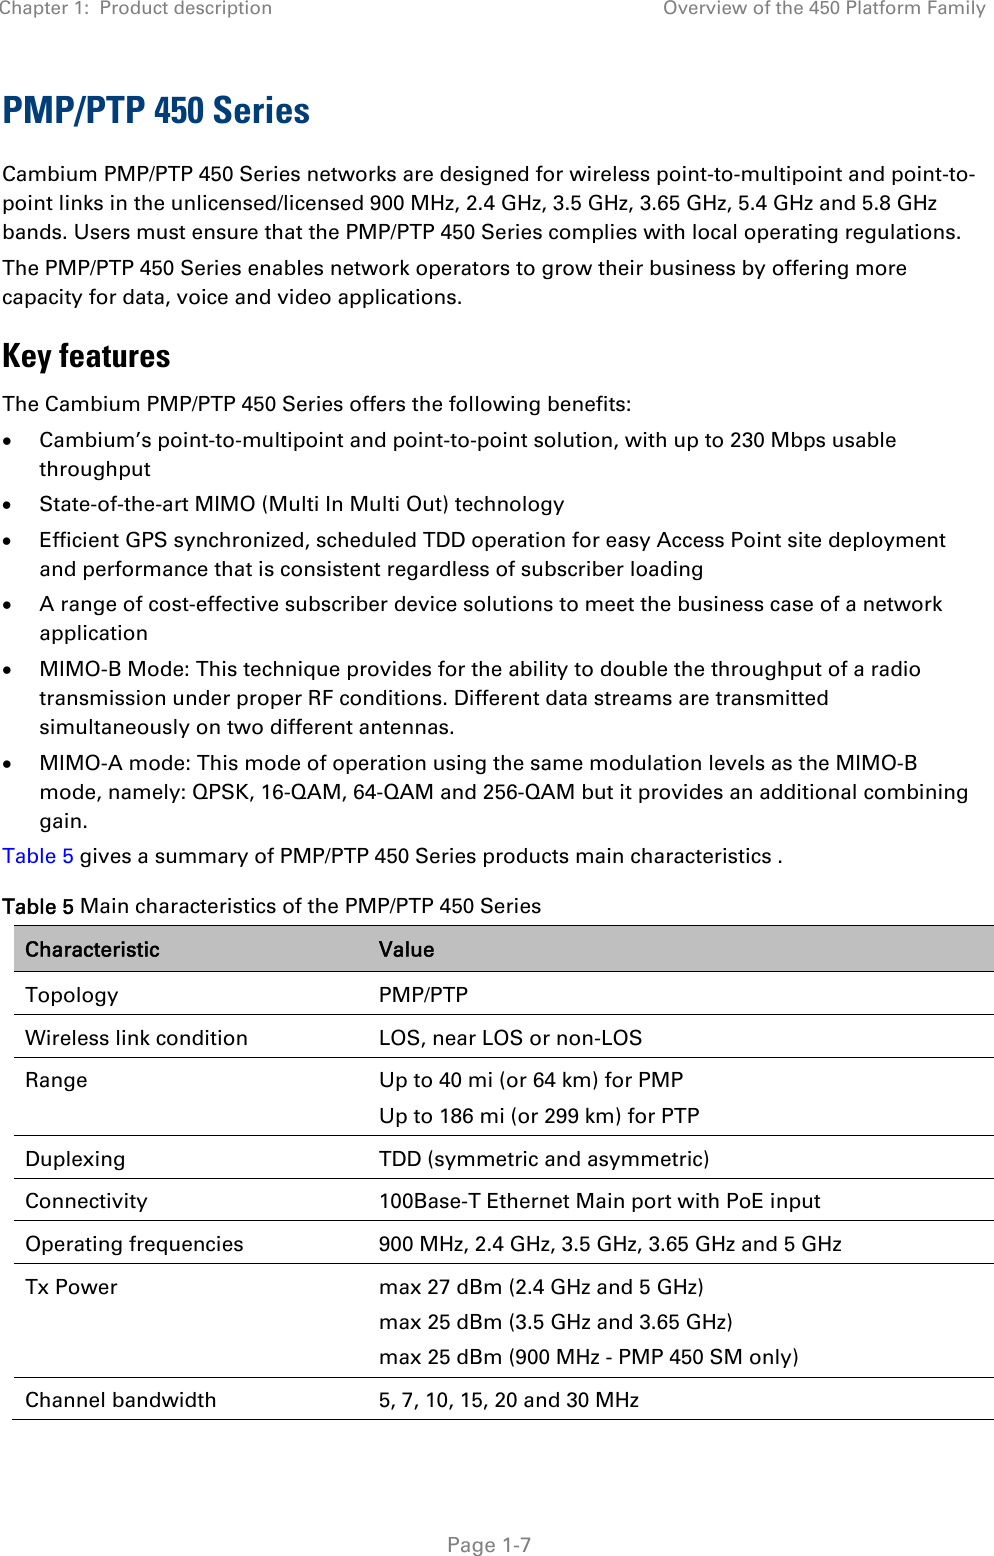 Chapter 1:  Product description  Overview of the 450 Platform Family   Page 1-7 PMP/PTP 450 Series Cambium PMP/PTP 450 Series networks are designed for wireless point-to-multipoint and point-to-point links in the unlicensed/licensed 900 MHz, 2.4 GHz, 3.5 GHz, 3.65 GHz, 5.4 GHz and 5.8 GHz bands. Users must ensure that the PMP/PTP 450 Series complies with local operating regulations.  The PMP/PTP 450 Series enables network operators to grow their business by offering more capacity for data, voice and video applications. Key features The Cambium PMP/PTP 450 Series offers the following benefits:   Cambium’s point-to-multipoint and point-to-point solution, with up to 230 Mbps usable throughput   State-of-the-art MIMO (Multi In Multi Out) technology   Efficient GPS synchronized, scheduled TDD operation for easy Access Point site deployment and performance that is consistent regardless of subscriber loading   A range of cost-effective subscriber device solutions to meet the business case of a network application   MIMO-B Mode: This technique provides for the ability to double the throughput of a radio transmission under proper RF conditions. Different data streams are transmitted simultaneously on two different antennas.   MIMO-A mode: This mode of operation using the same modulation levels as the MIMO-B mode, namely: QPSK, 16-QAM, 64-QAM and 256-QAM but it provides an additional combining gain. Table 5 gives a summary of PMP/PTP 450 Series products main characteristics . Table 5 Main characteristics of the PMP/PTP 450 Series Characteristic  Value Topology PMP/PTP Wireless link condition  LOS, near LOS or non-LOS Range  Up to 40 mi (or 64 km) for PMP Up to 186 mi (or 299 km) for PTP  Duplexing  TDD (symmetric and asymmetric) Connectivity  100Base-T Ethernet Main port with PoE input Operating frequencies  900 MHz, 2.4 GHz, 3.5 GHz, 3.65 GHz and 5 GHz Tx Power  max 27 dBm (2.4 GHz and 5 GHz) max 25 dBm (3.5 GHz and 3.65 GHz) max 25 dBm (900 MHz - PMP 450 SM only) Channel bandwidth  5, 7, 10, 15, 20 and 30 MHz 